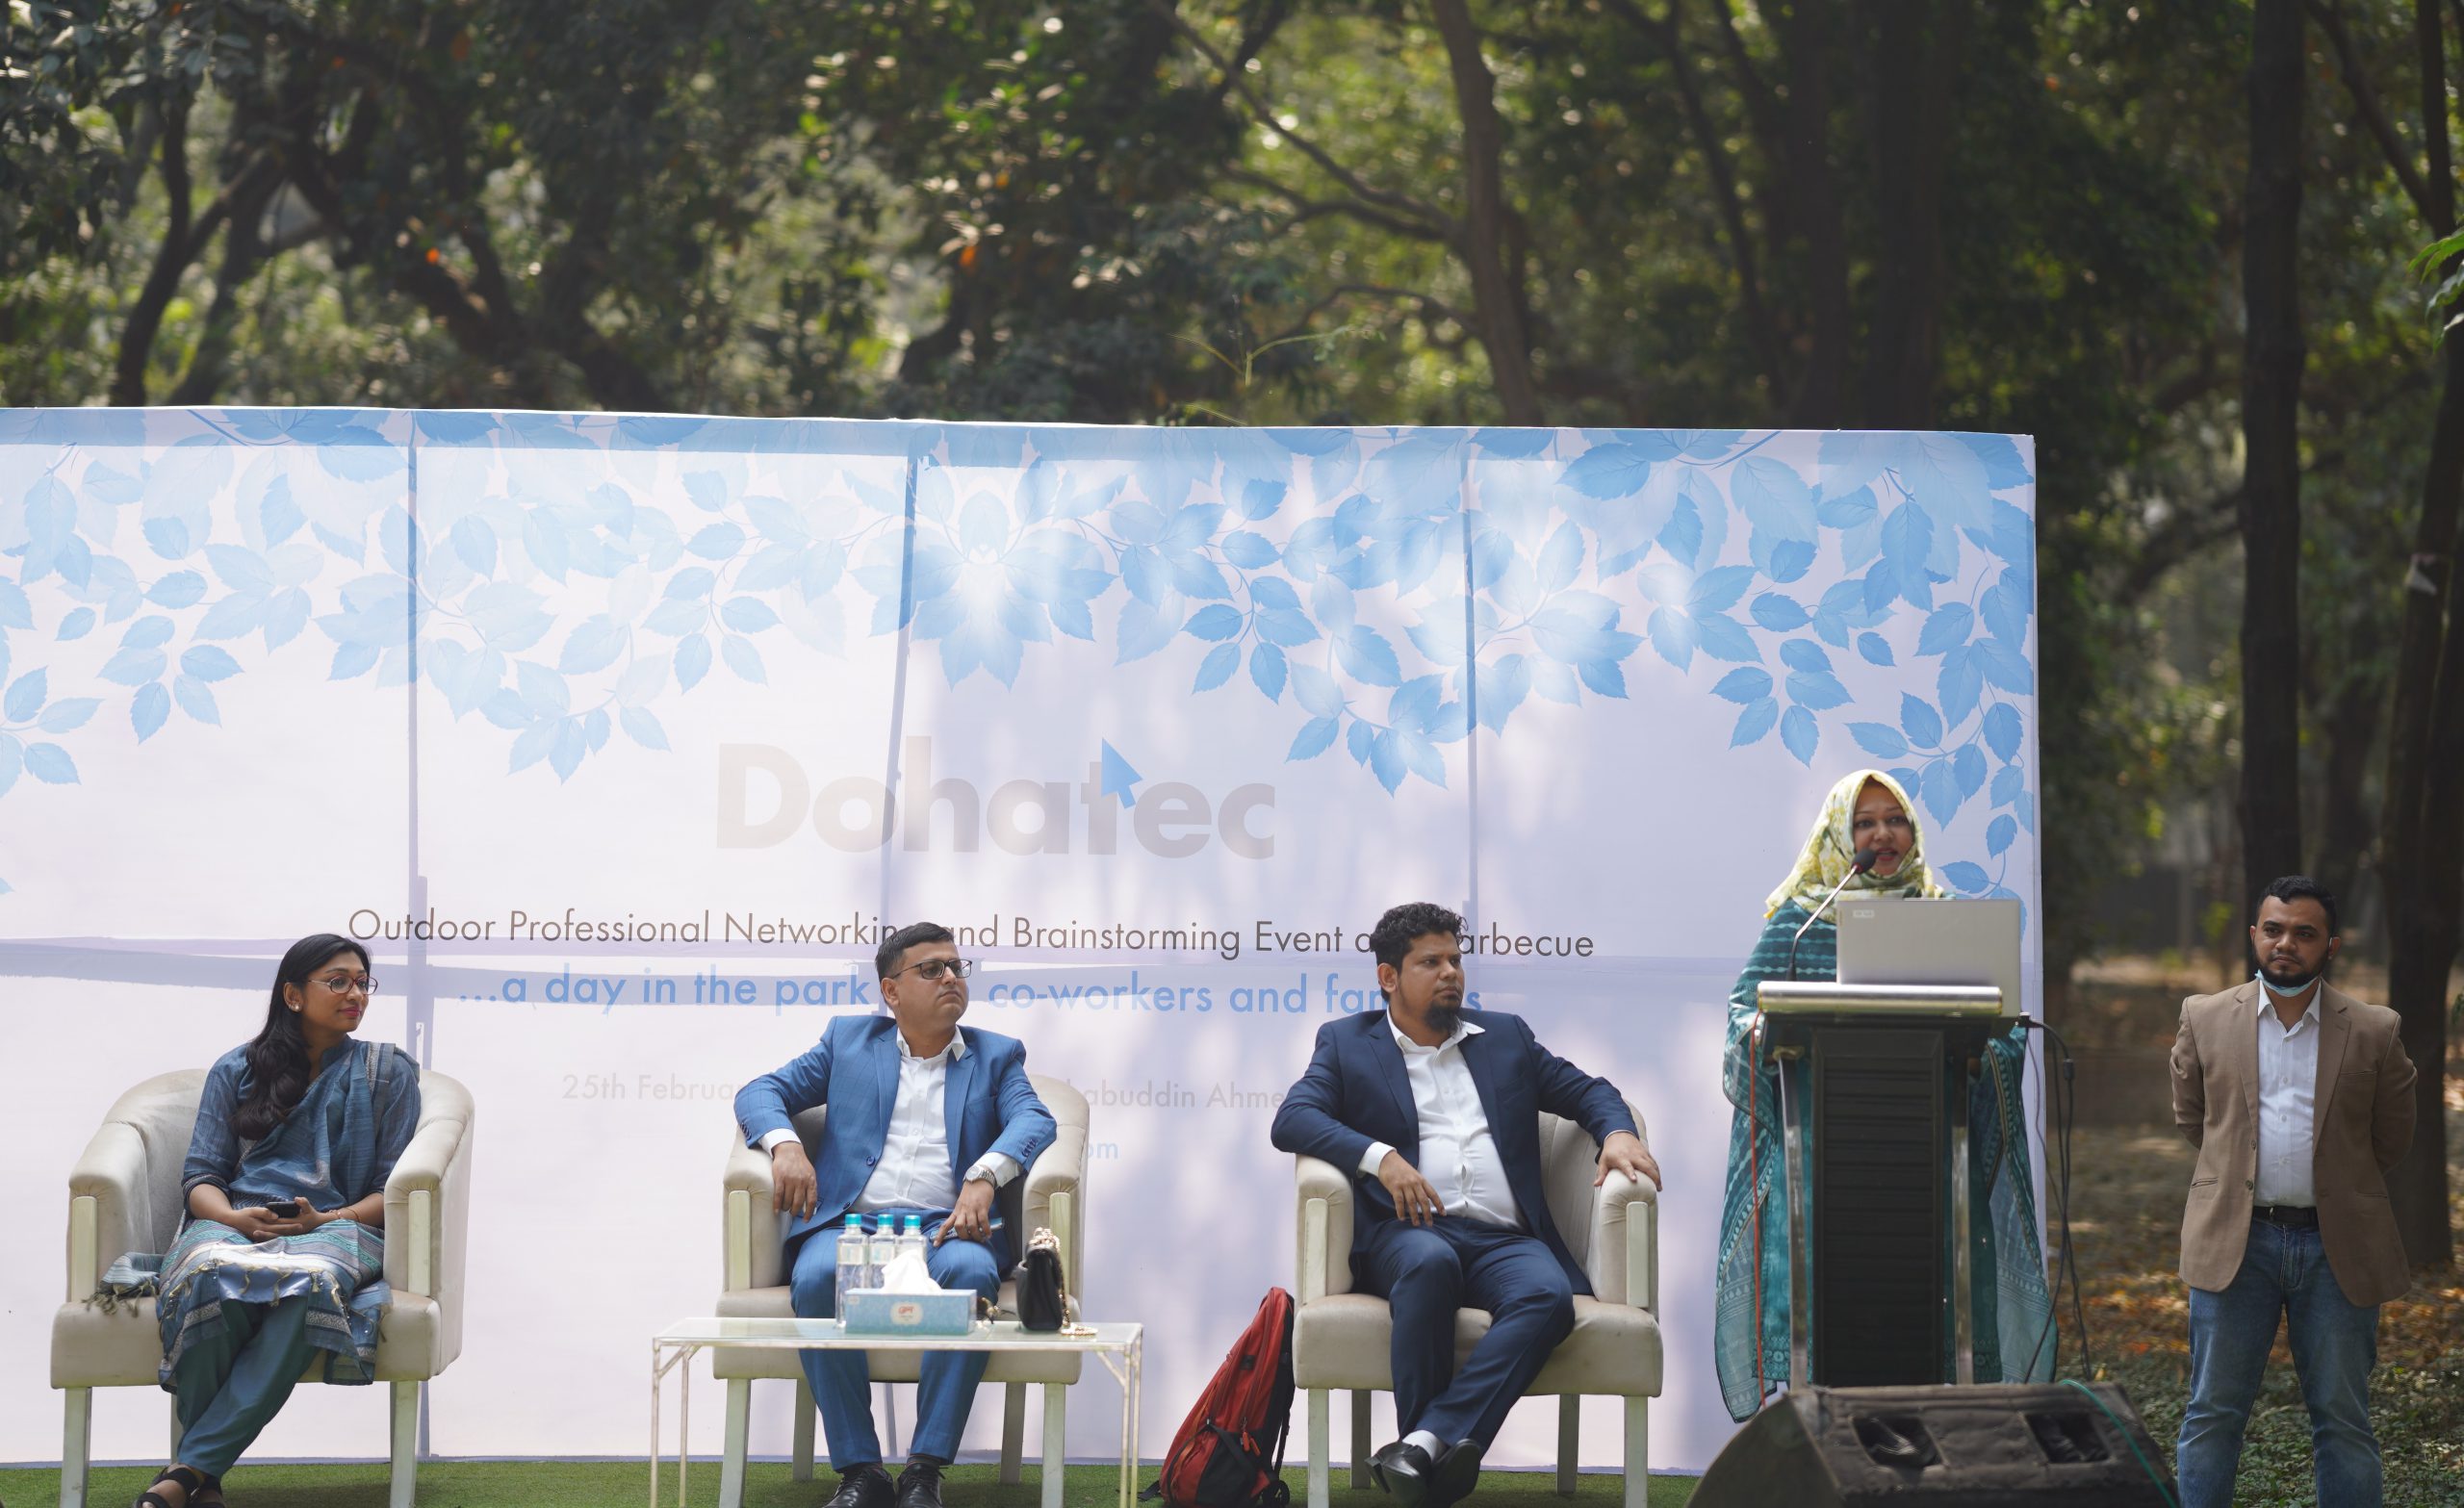 Dohatec Employees Enjoy a Beautiful Day in the Justice Shahabuddin Ahmed Park